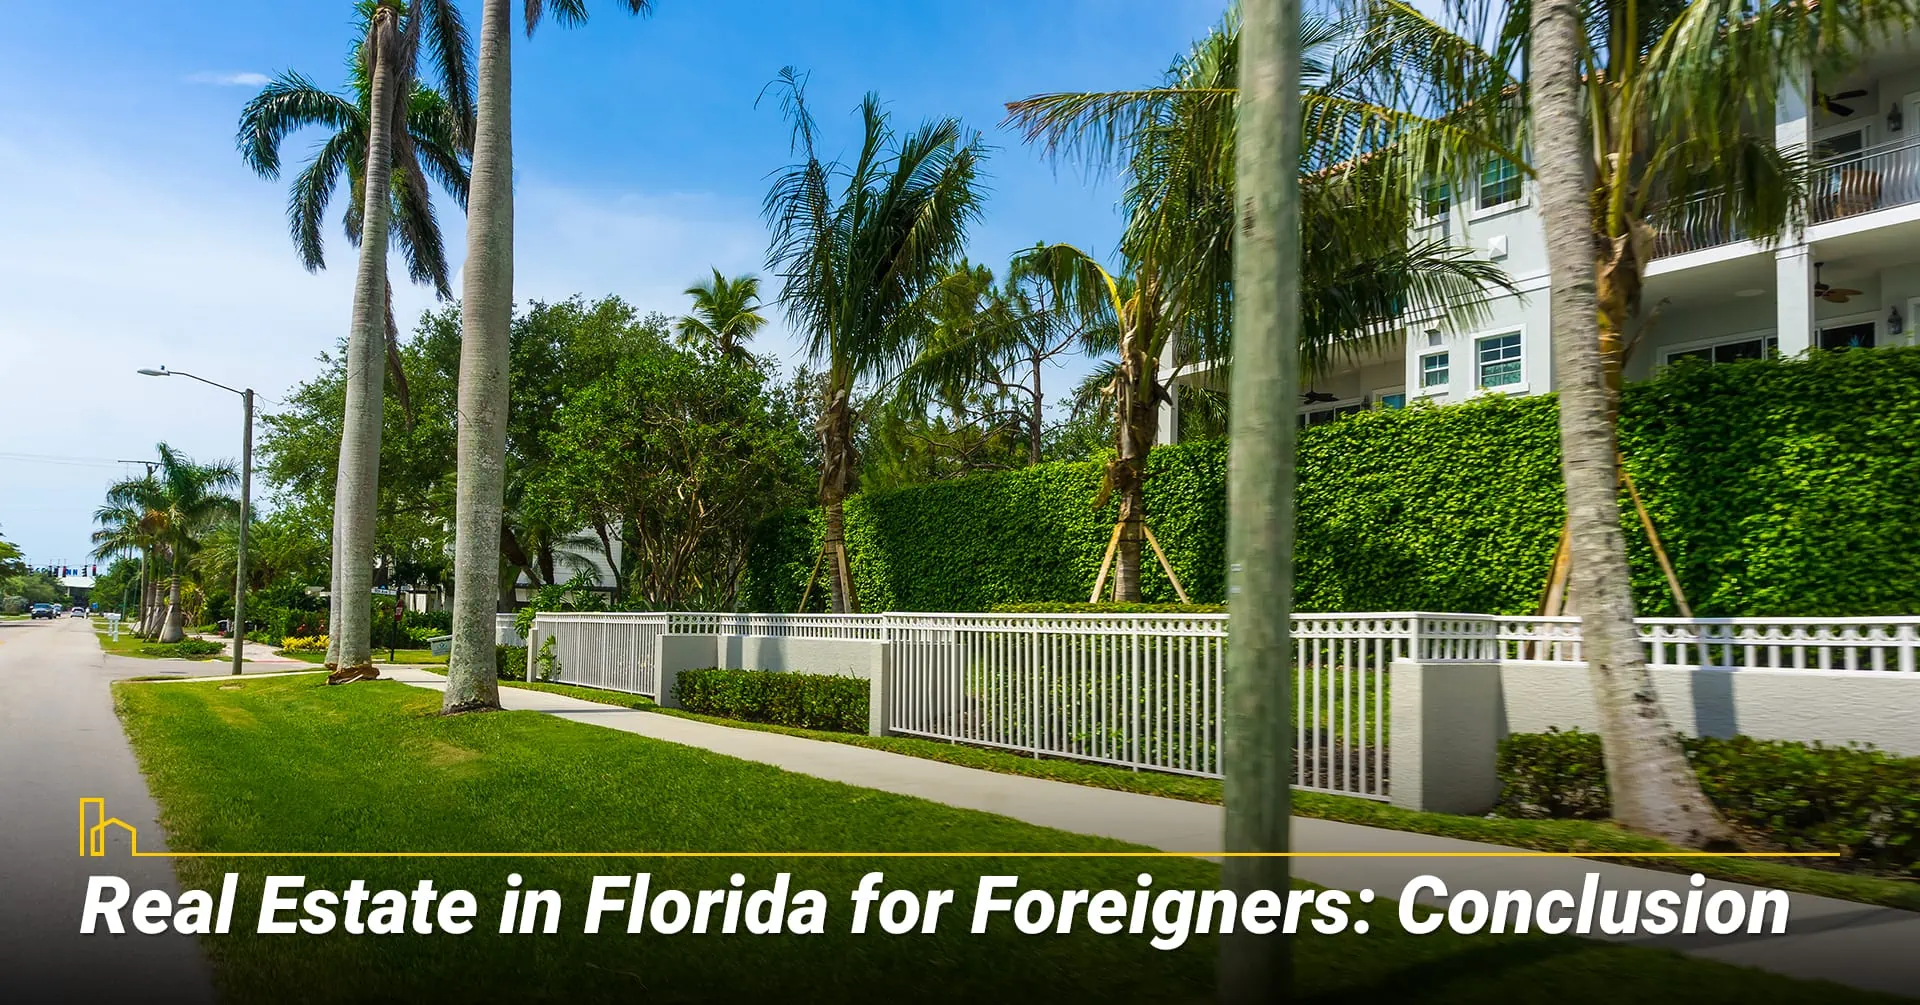 Real Estate in Florida for Foreigners: Conclusion